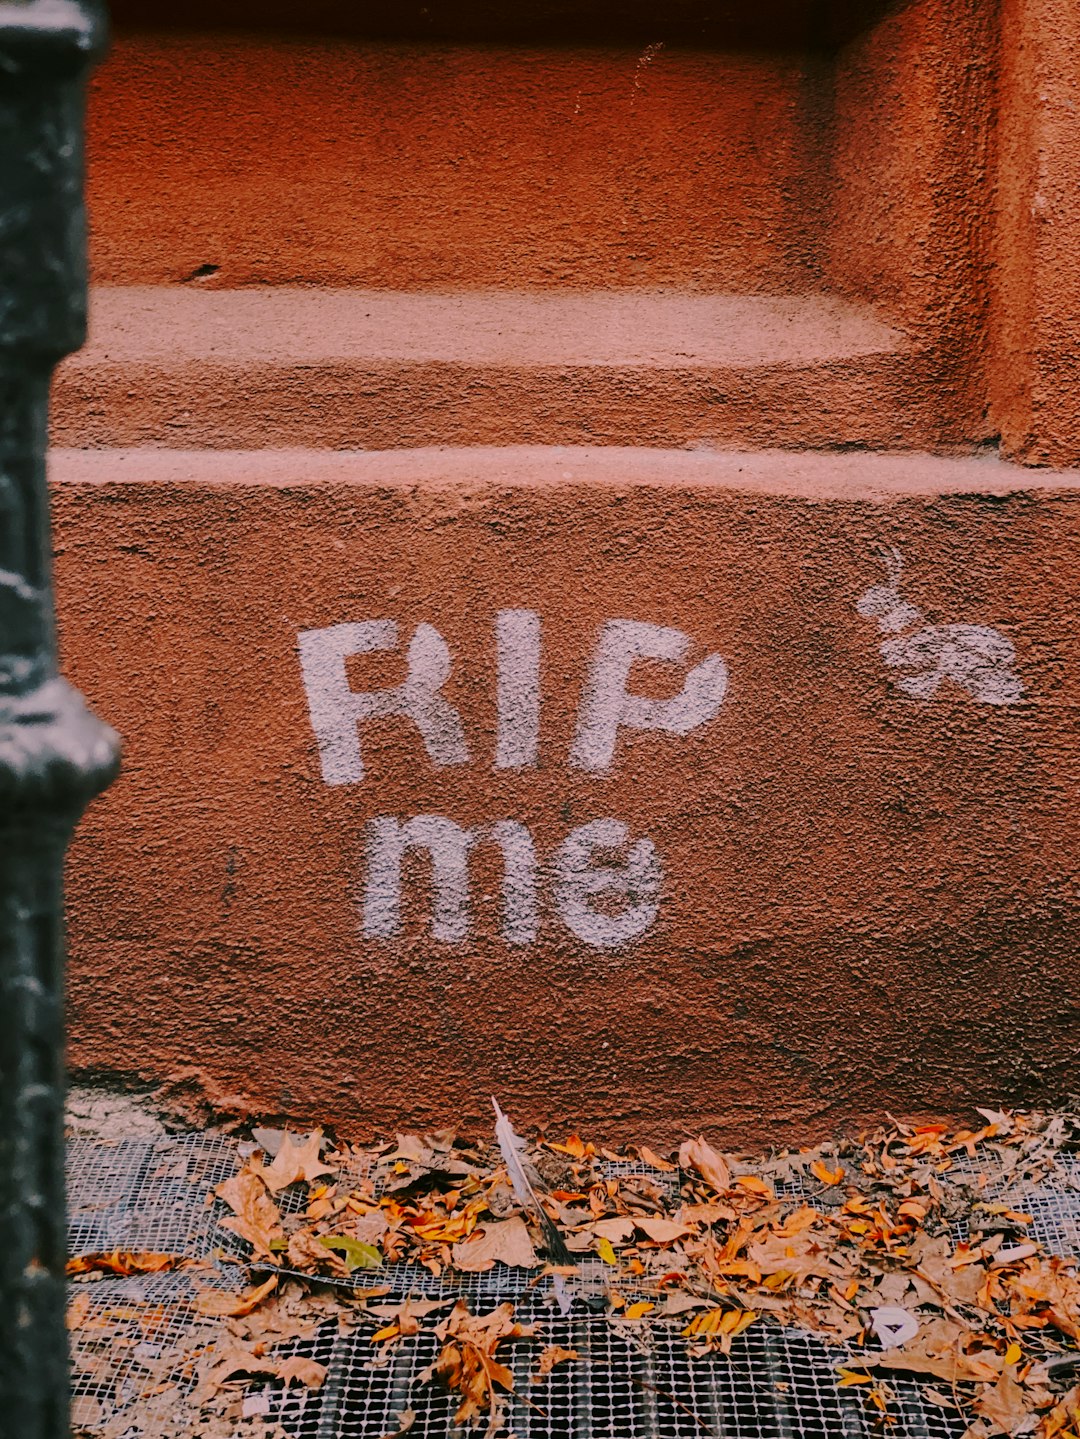 rip me text printed on red concrete wall